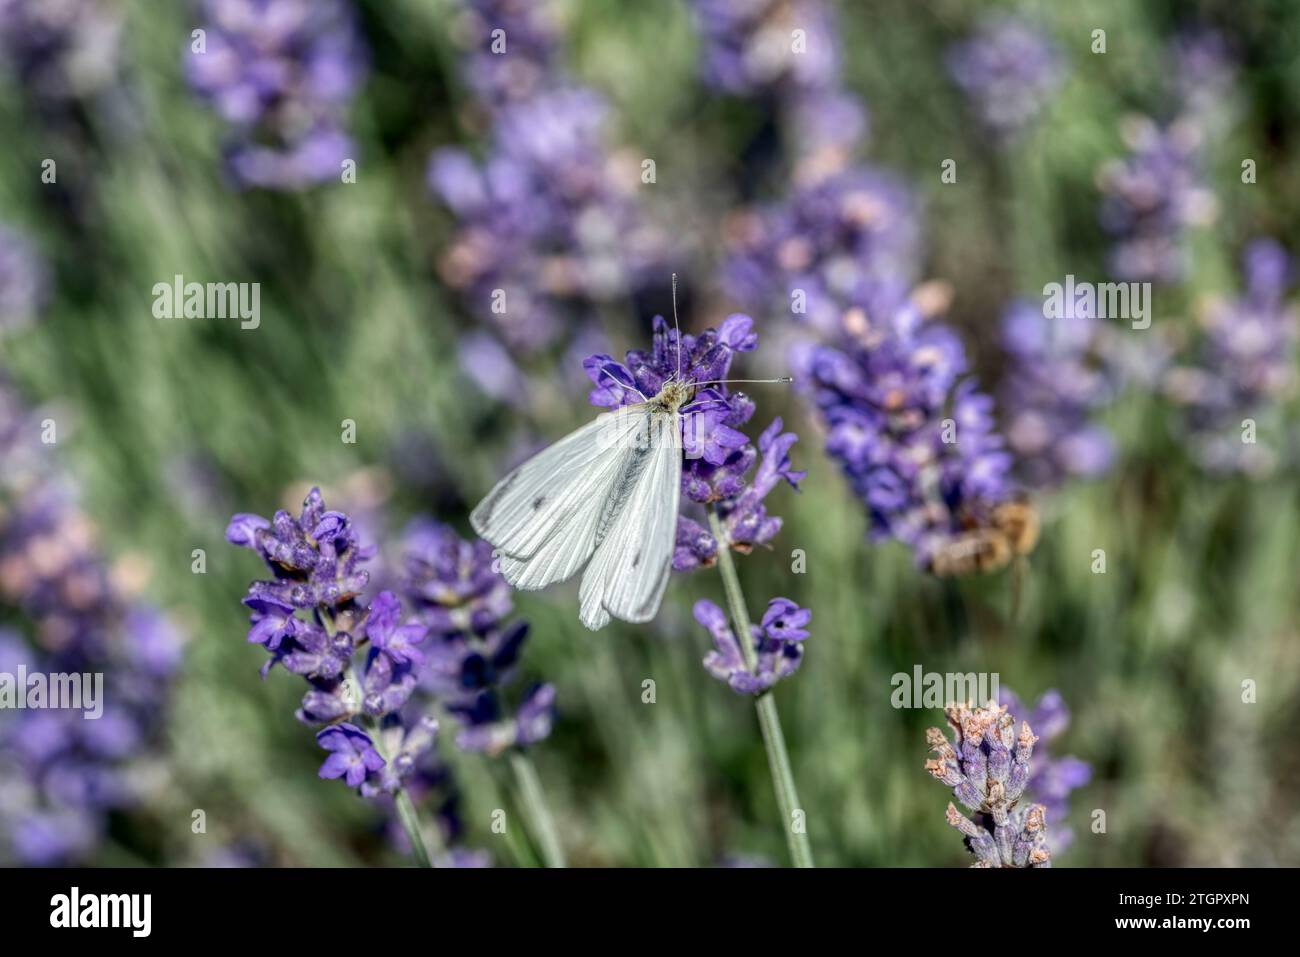 Beautiful violet purple lavender flowers in the garden on a late evening sun with white butterfly Stock Photo